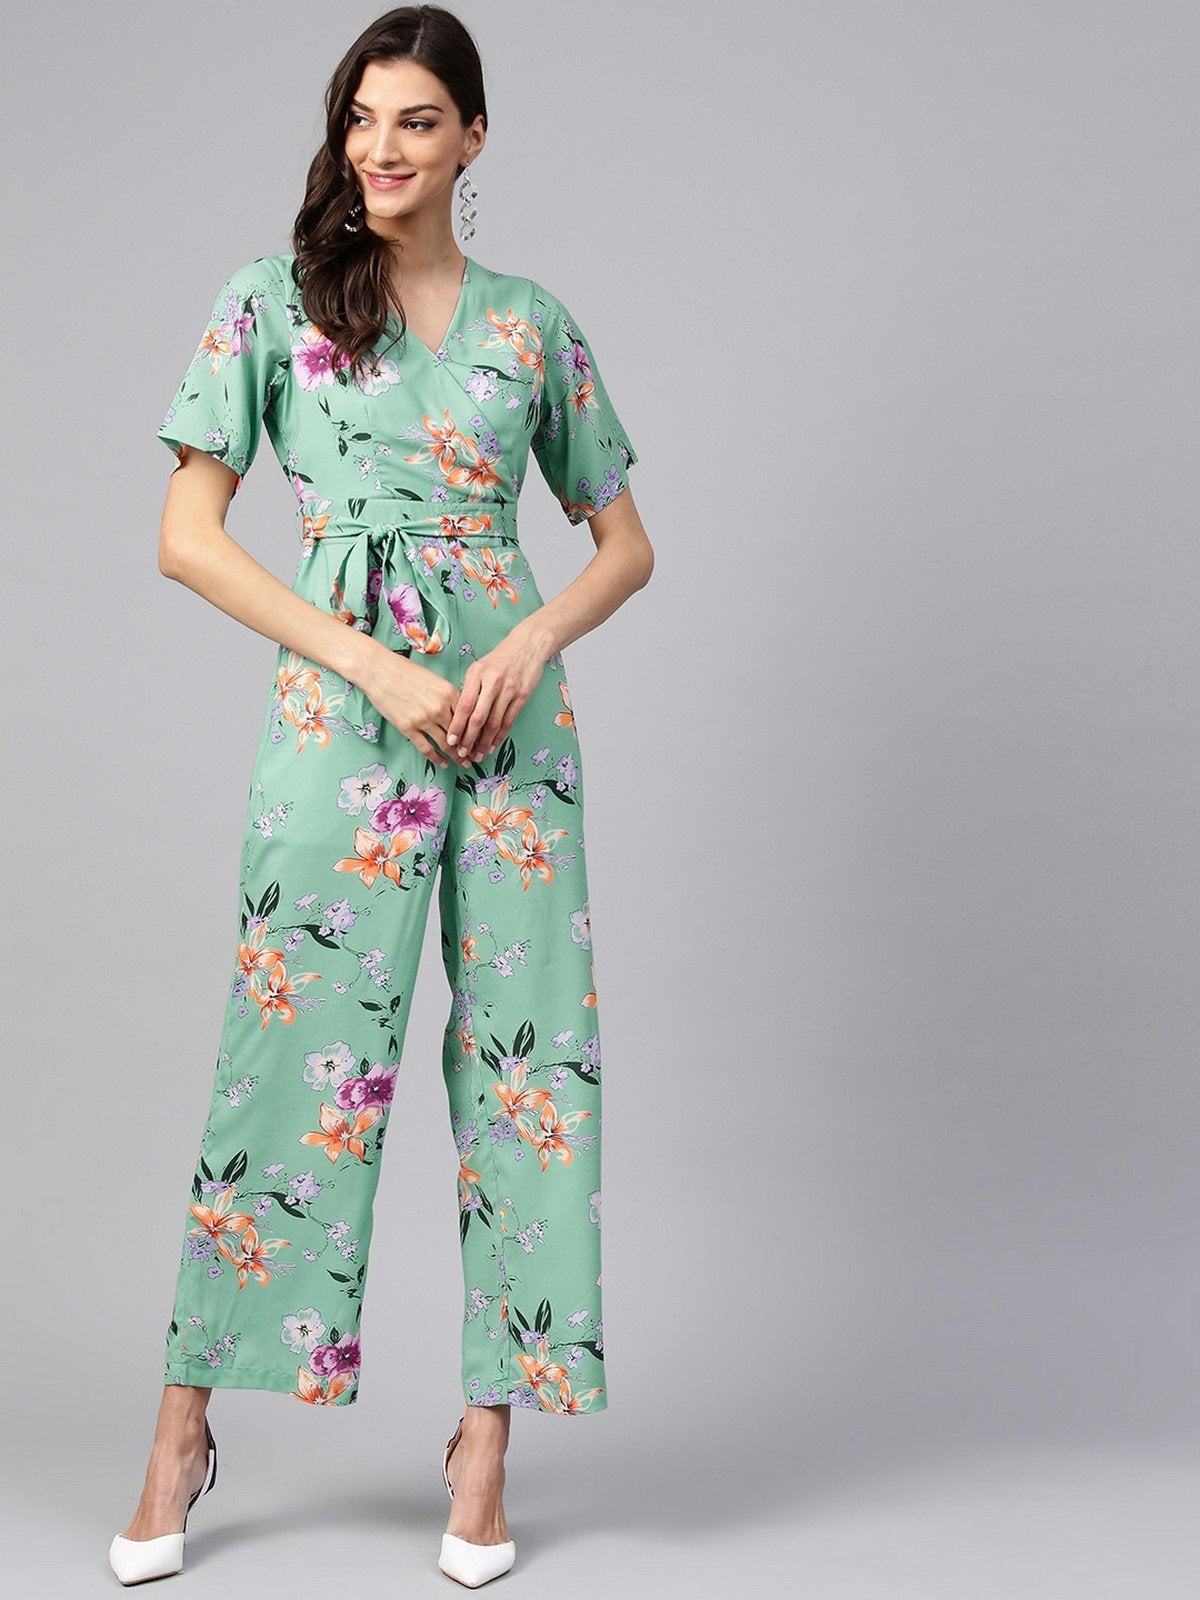 Women's Floral Overlapping Jumpsuit - Pannkh